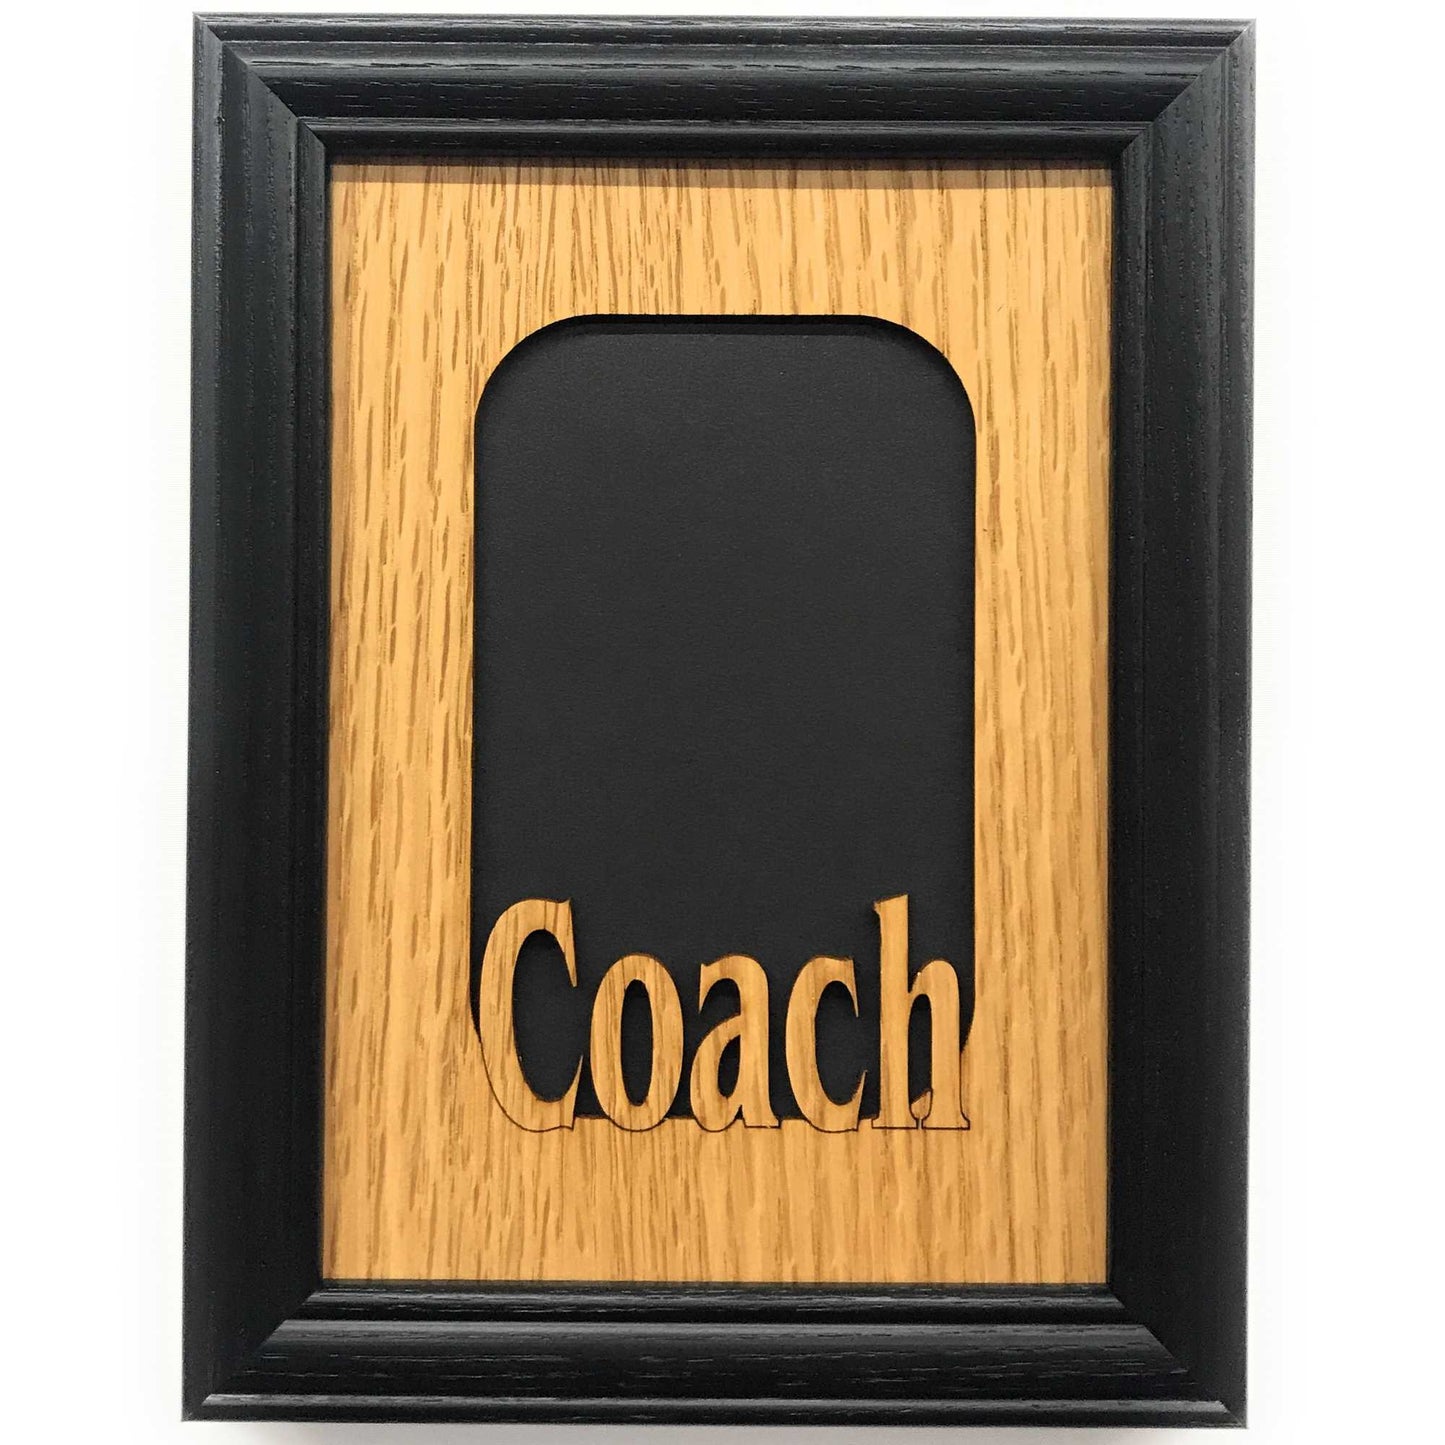 Coach Picture Frame - 5x7 Frame Holds 3x5 Photo